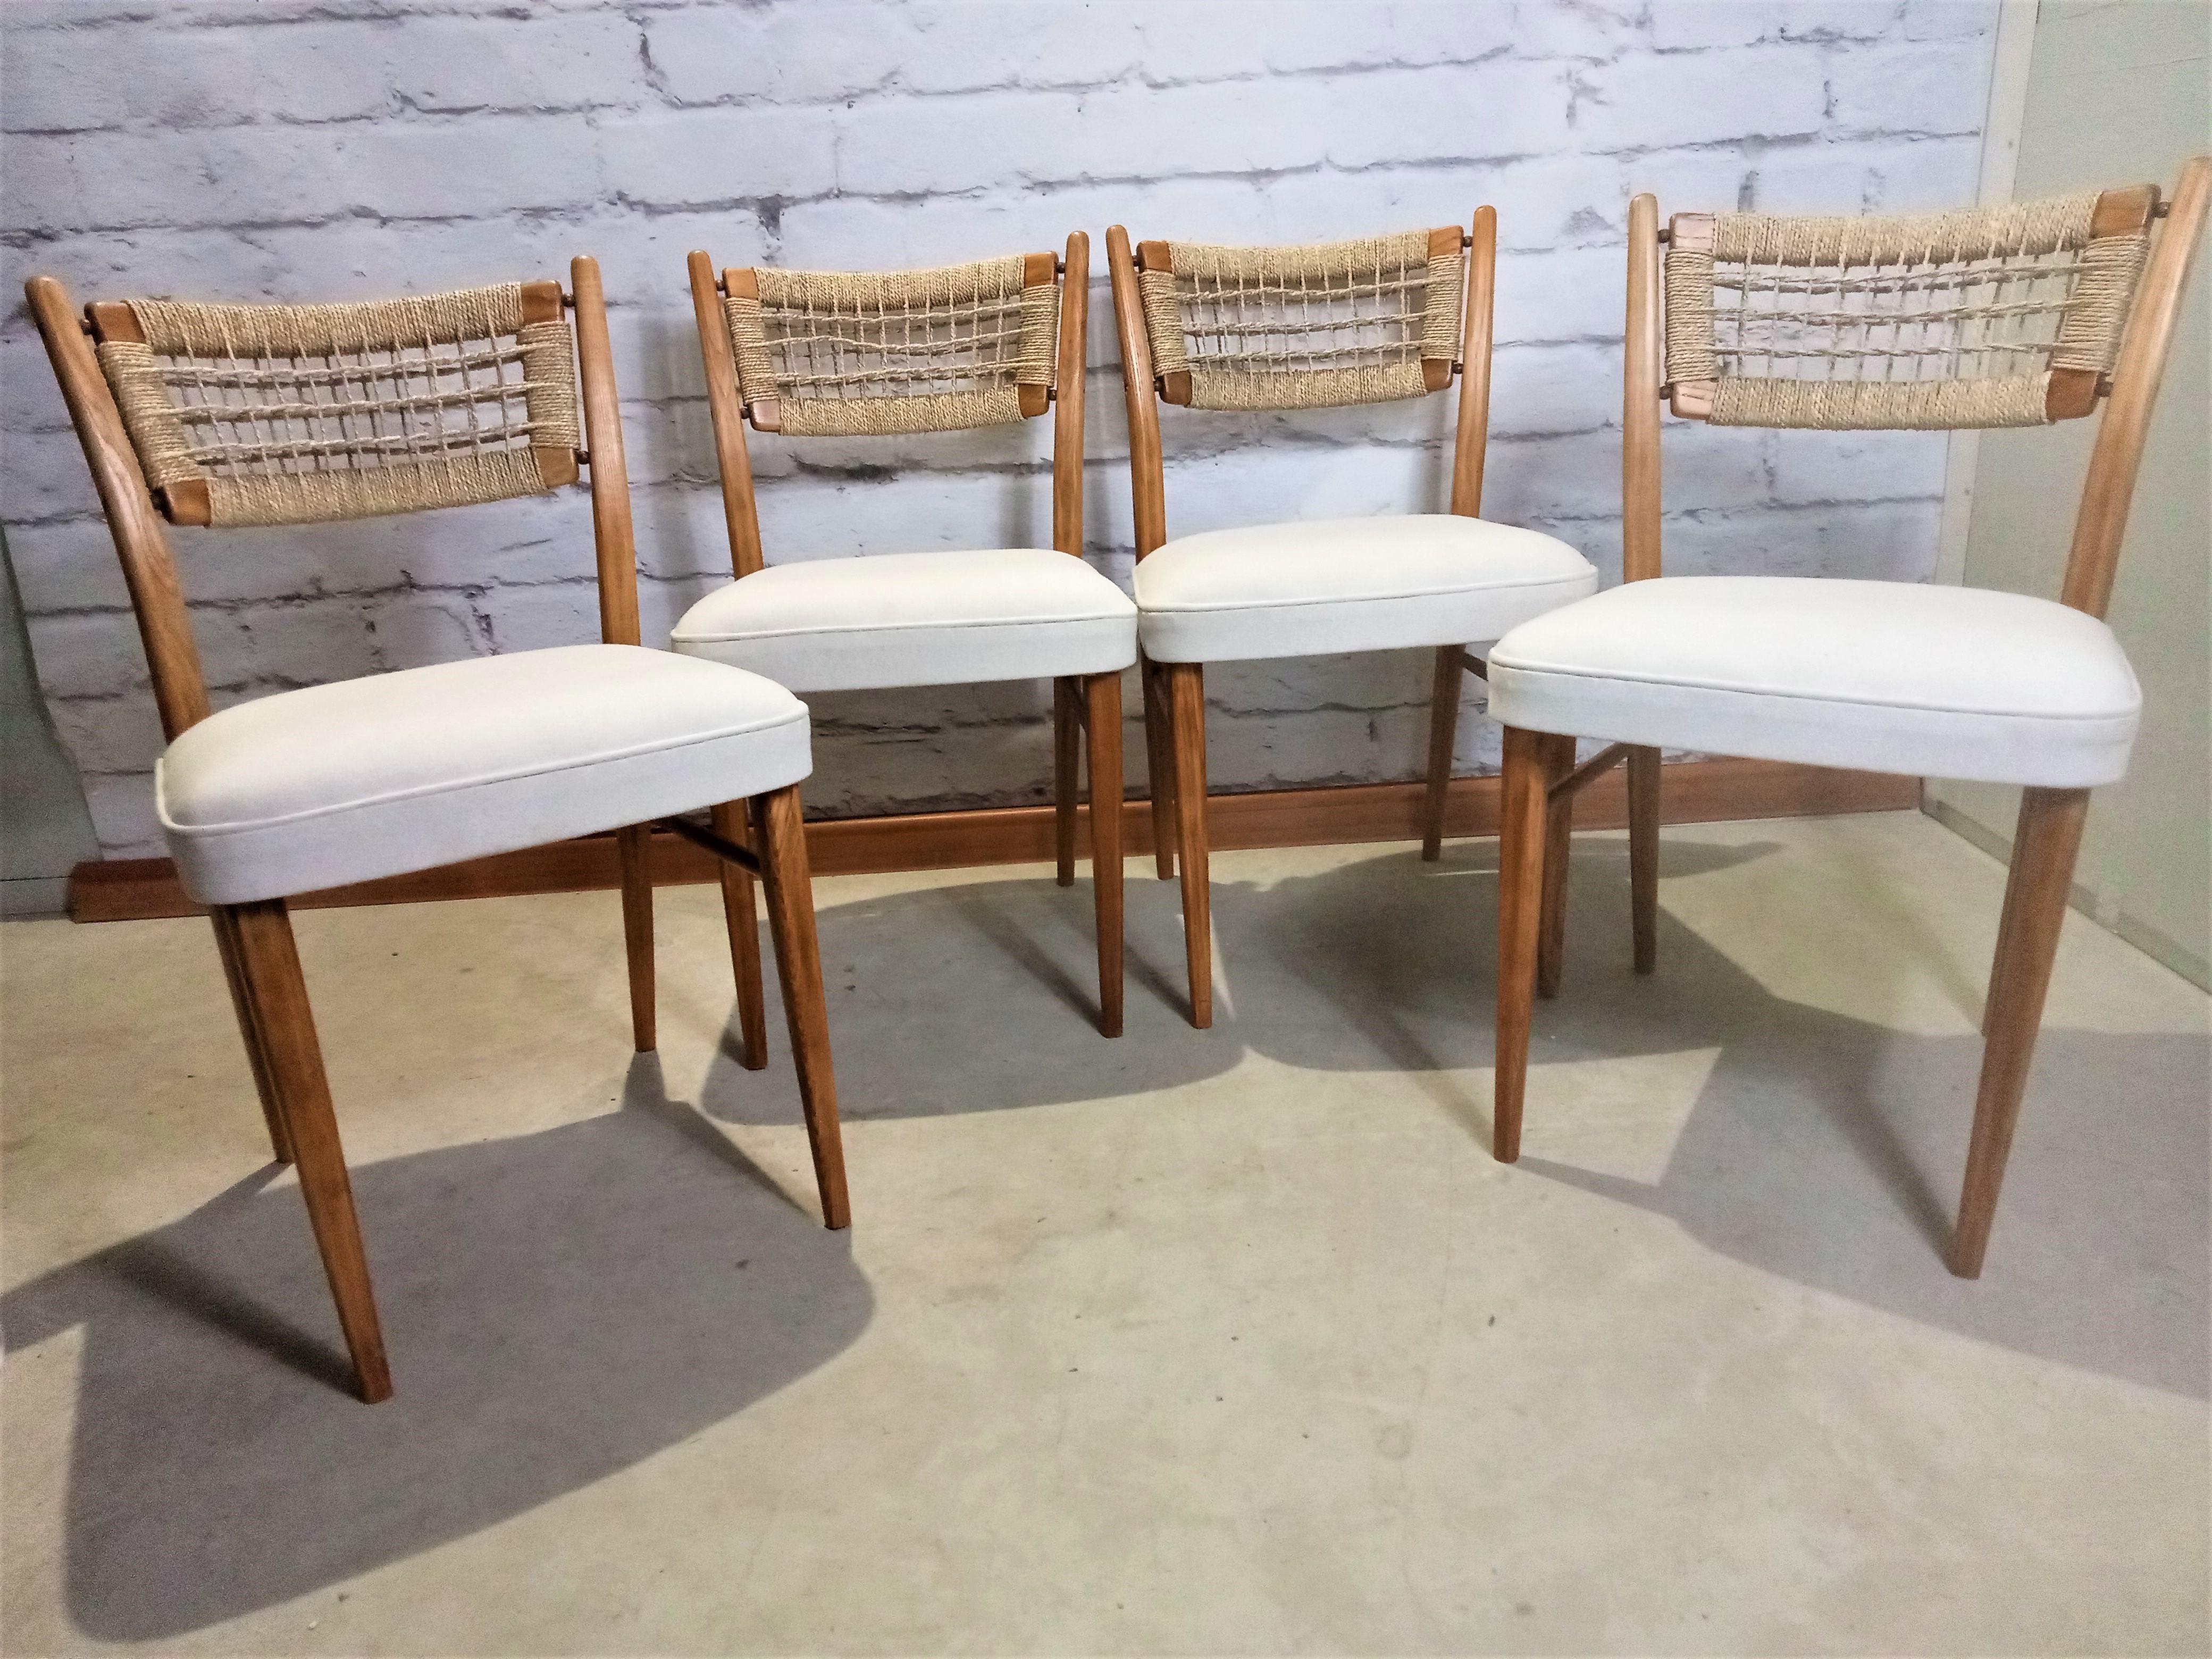 Set of 4 chairs with backs made of papercord. Light, elegant dining chairs. Maple wood frame, seats reupholstered with woolen fabric. Rarely seen, they will be an eye catcher in the dining room.